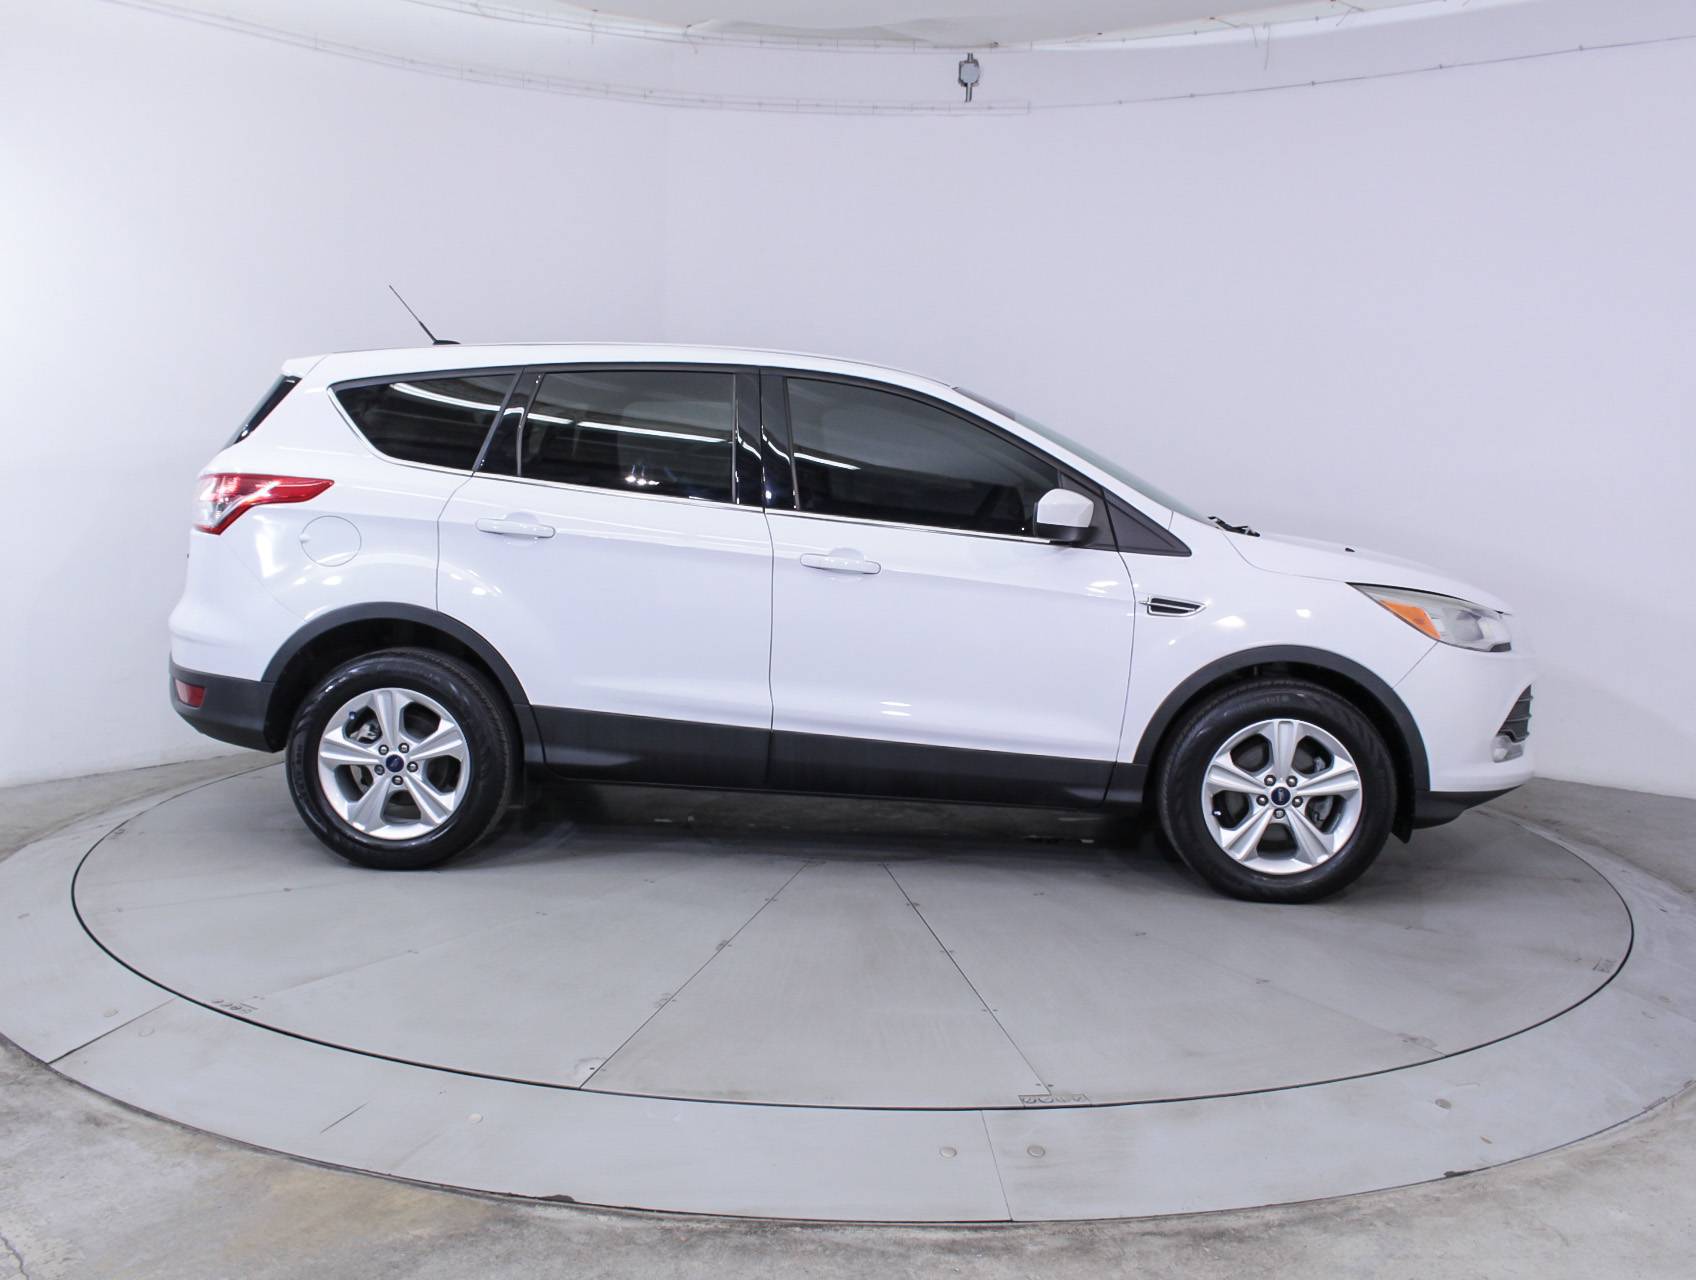 Florida Fine Cars - Used FORD ESCAPE 2014 WEST PALM Ecoboost Se